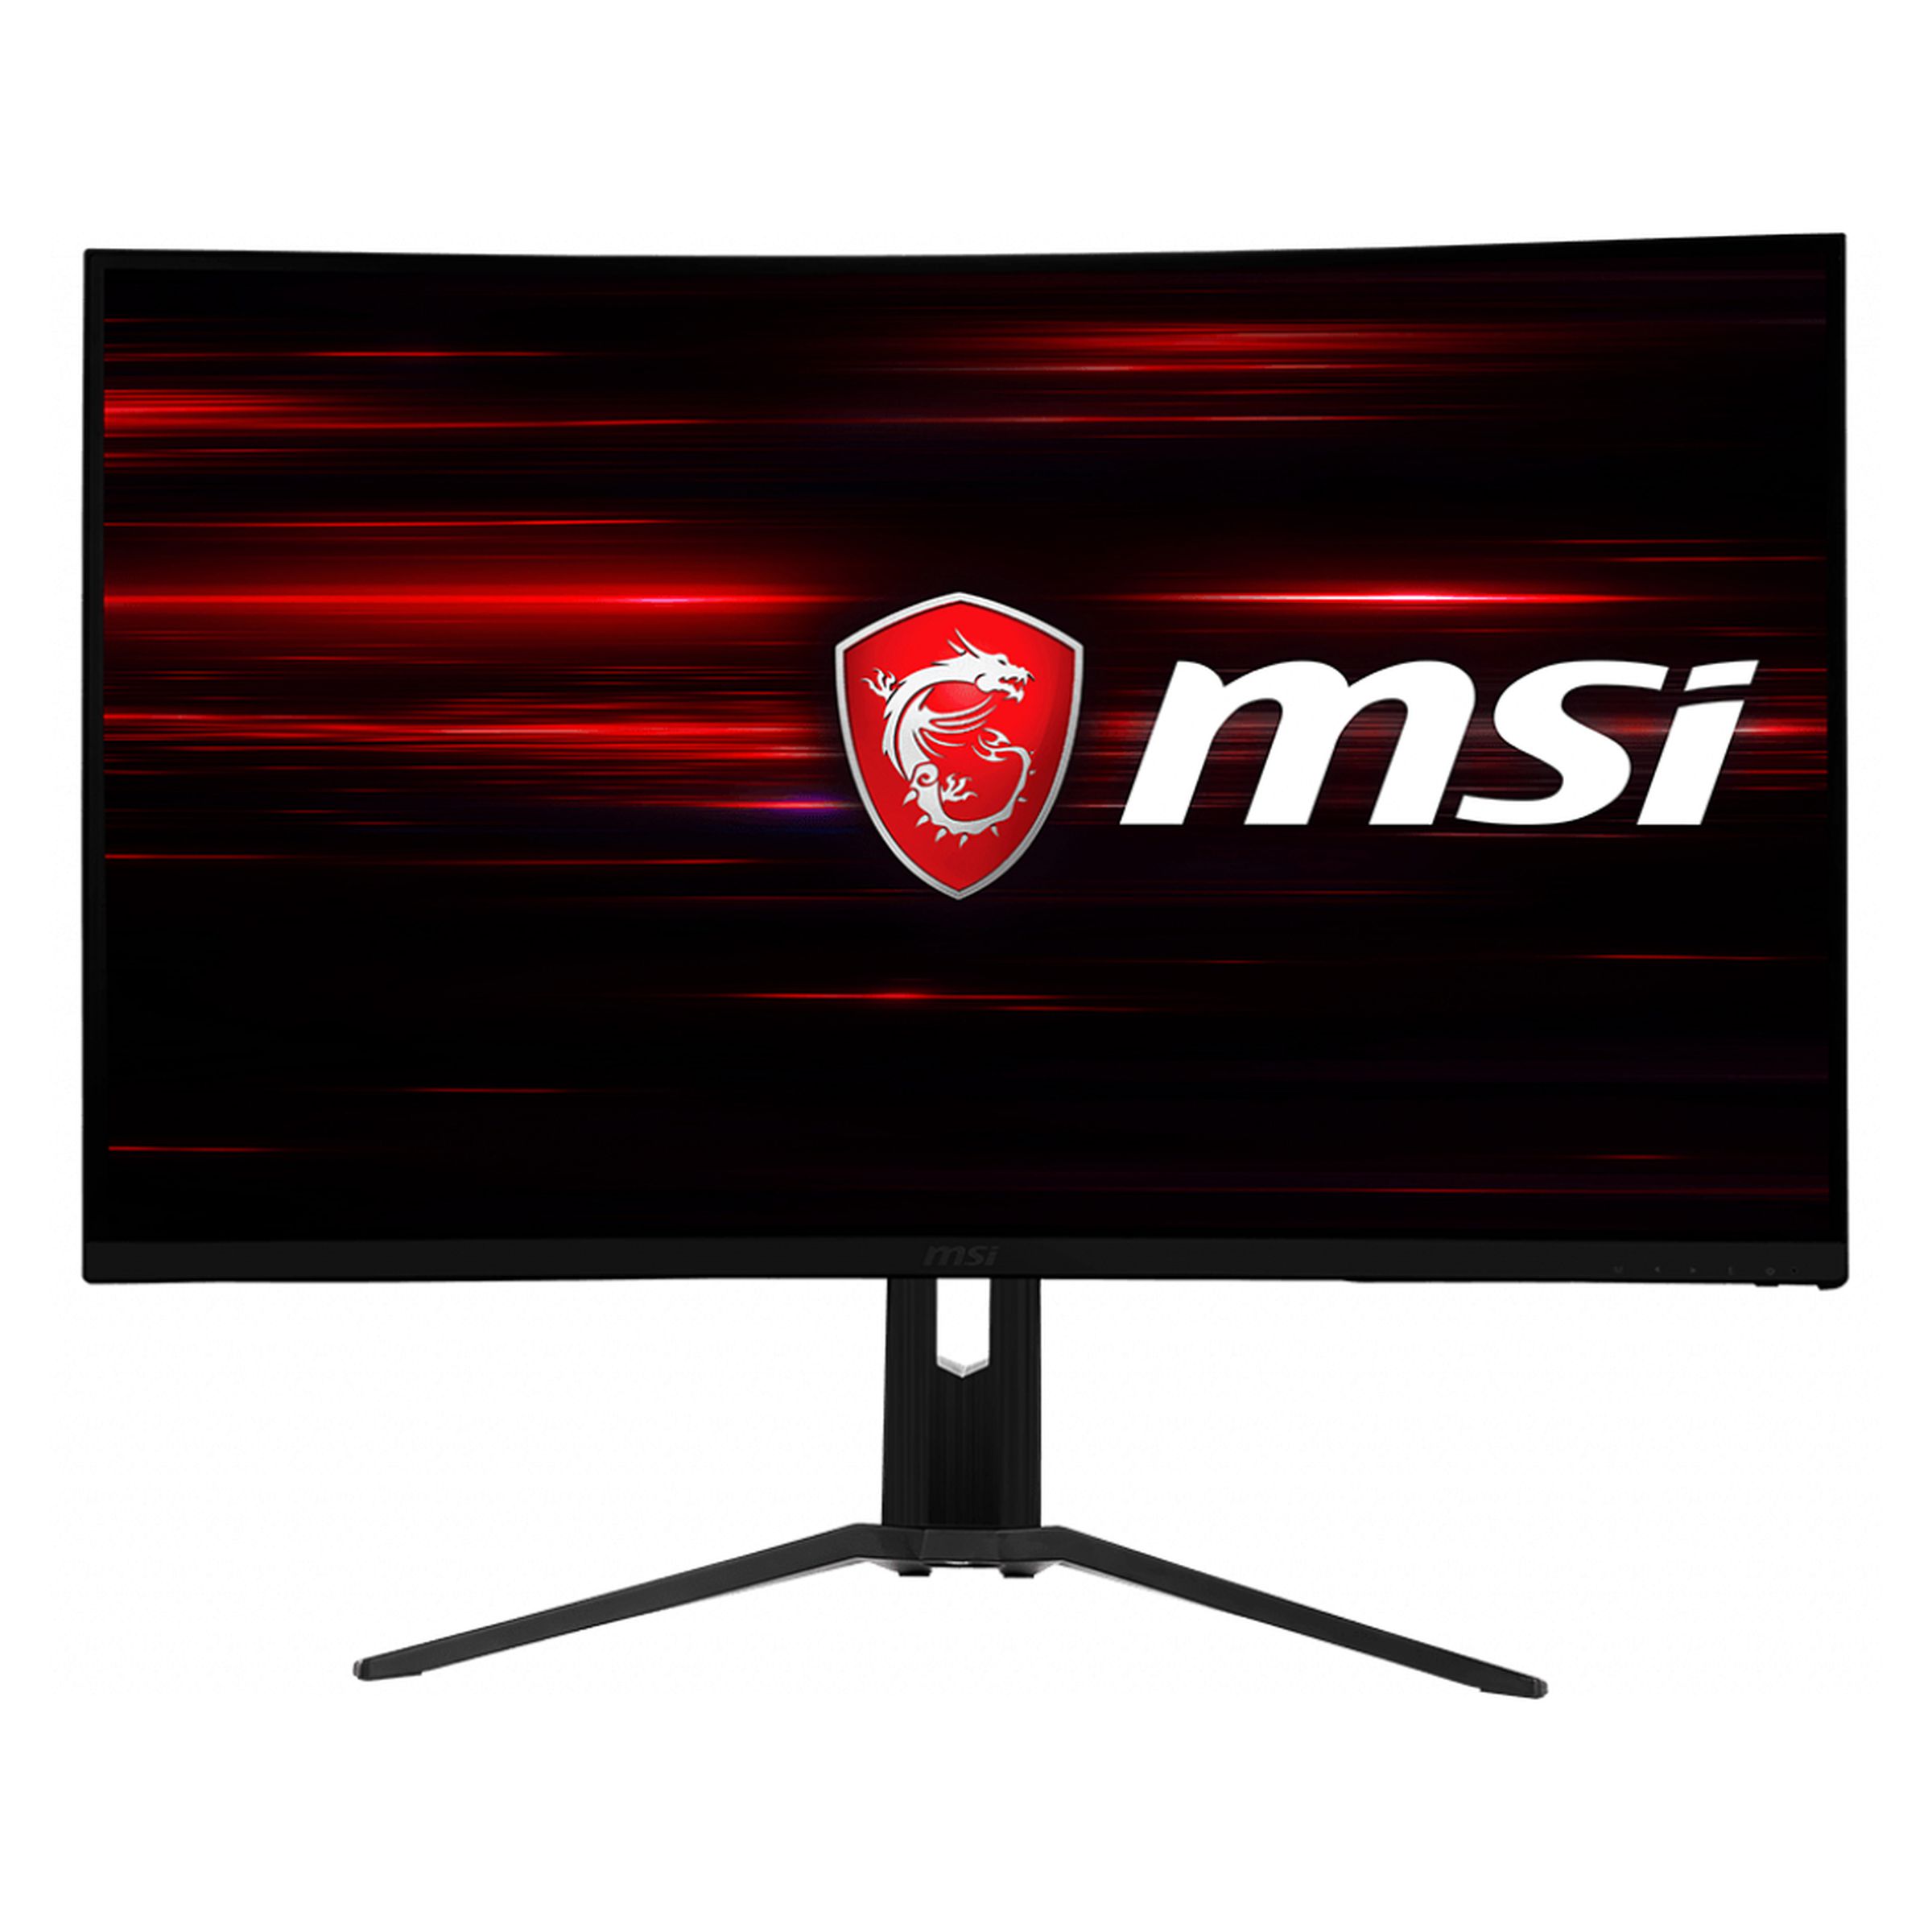 The budget-friendly panel packs a 144Hz refresh rate and 1440p resolution.